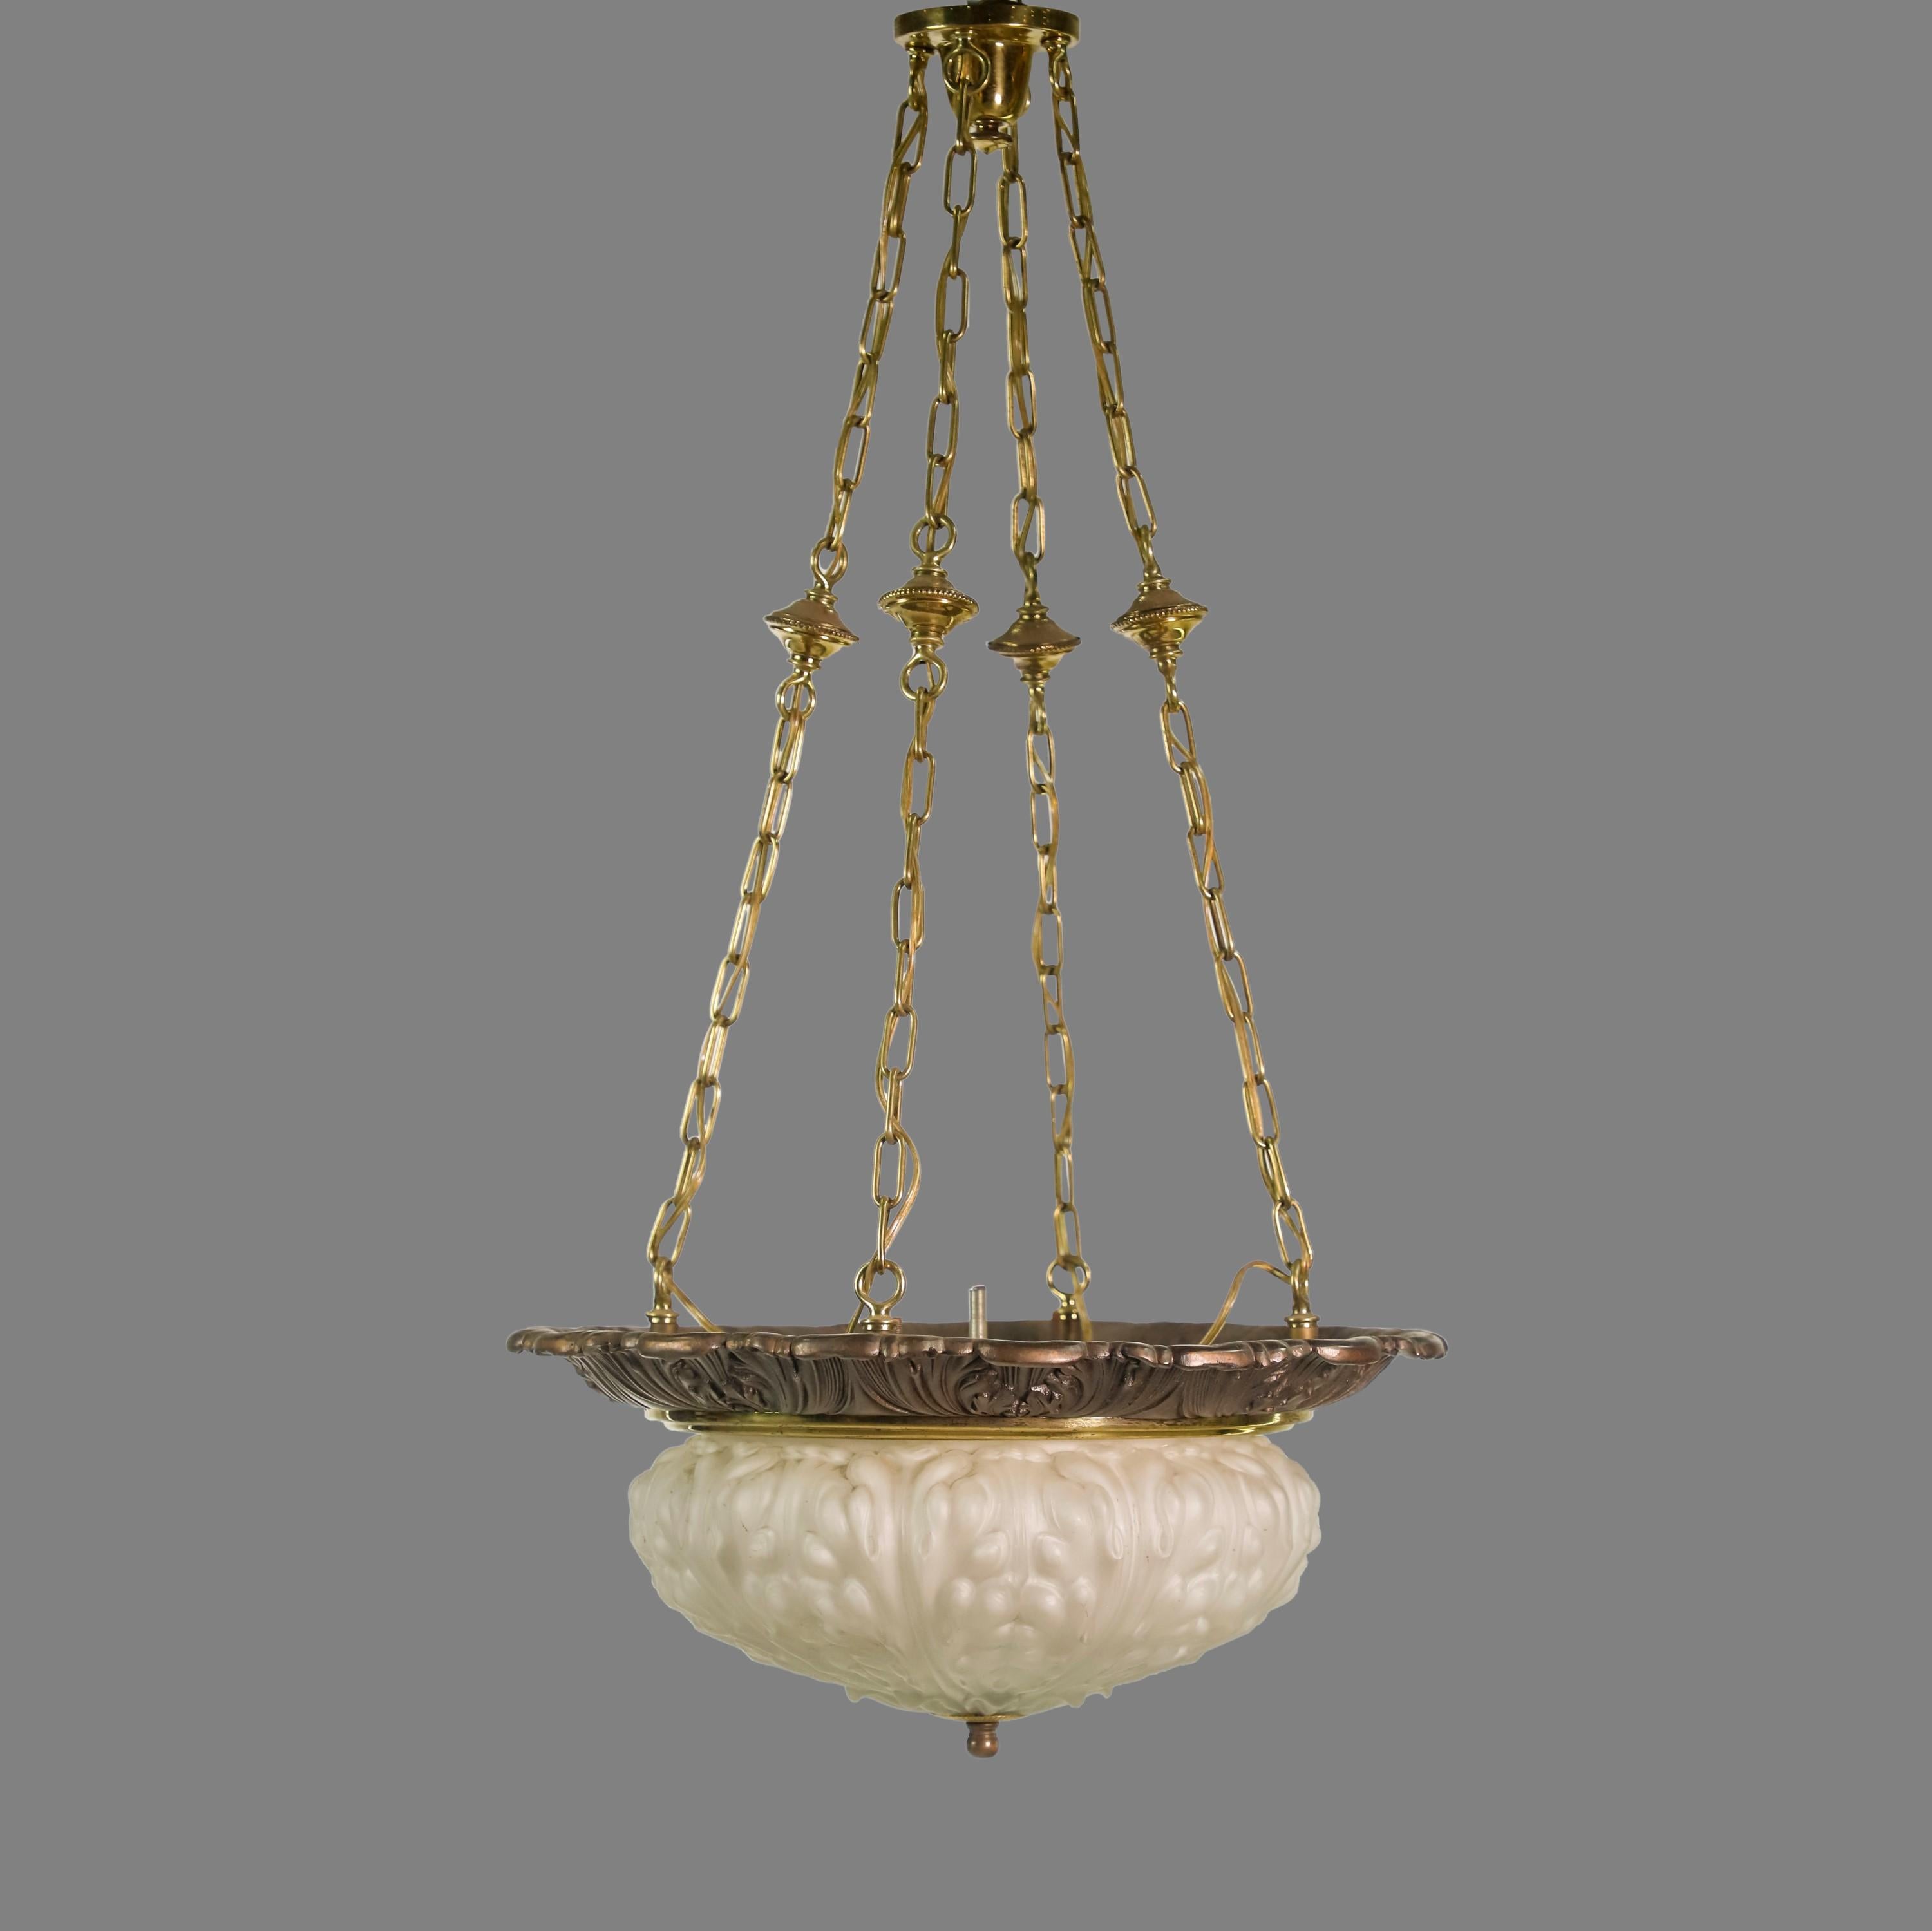 20th Century pendant light with brass hardware. Features a cast milk glass dish on bottom. Takes four standard medium base light bulbs. Cleaned and restored. Please note, this item is located in our Scranton, PA location.